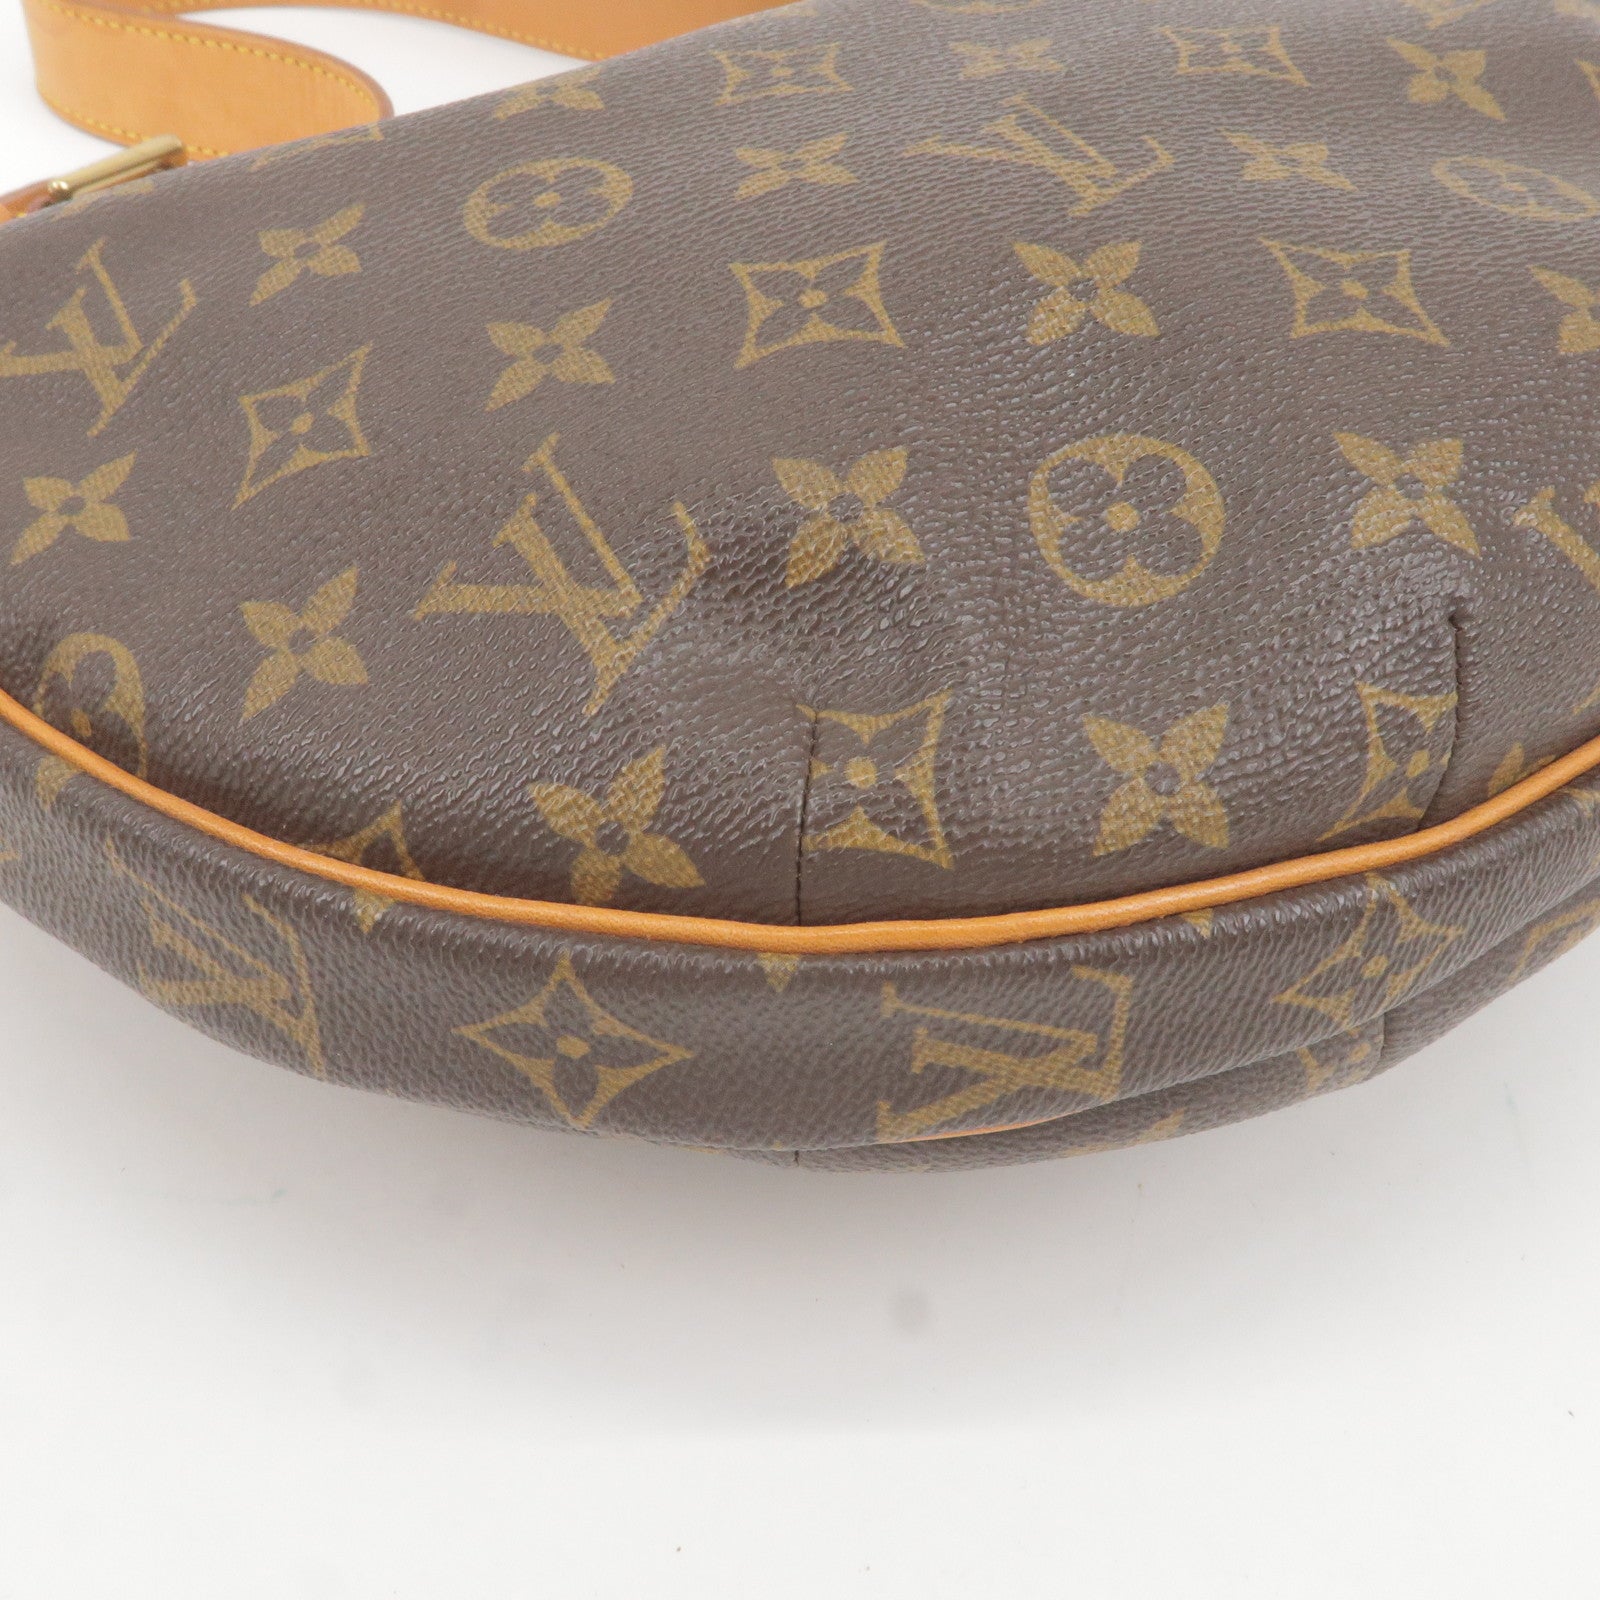 Louis Vuitton 2020 Pre-owned Limited Edition Monogram Two-Way Bag - Black